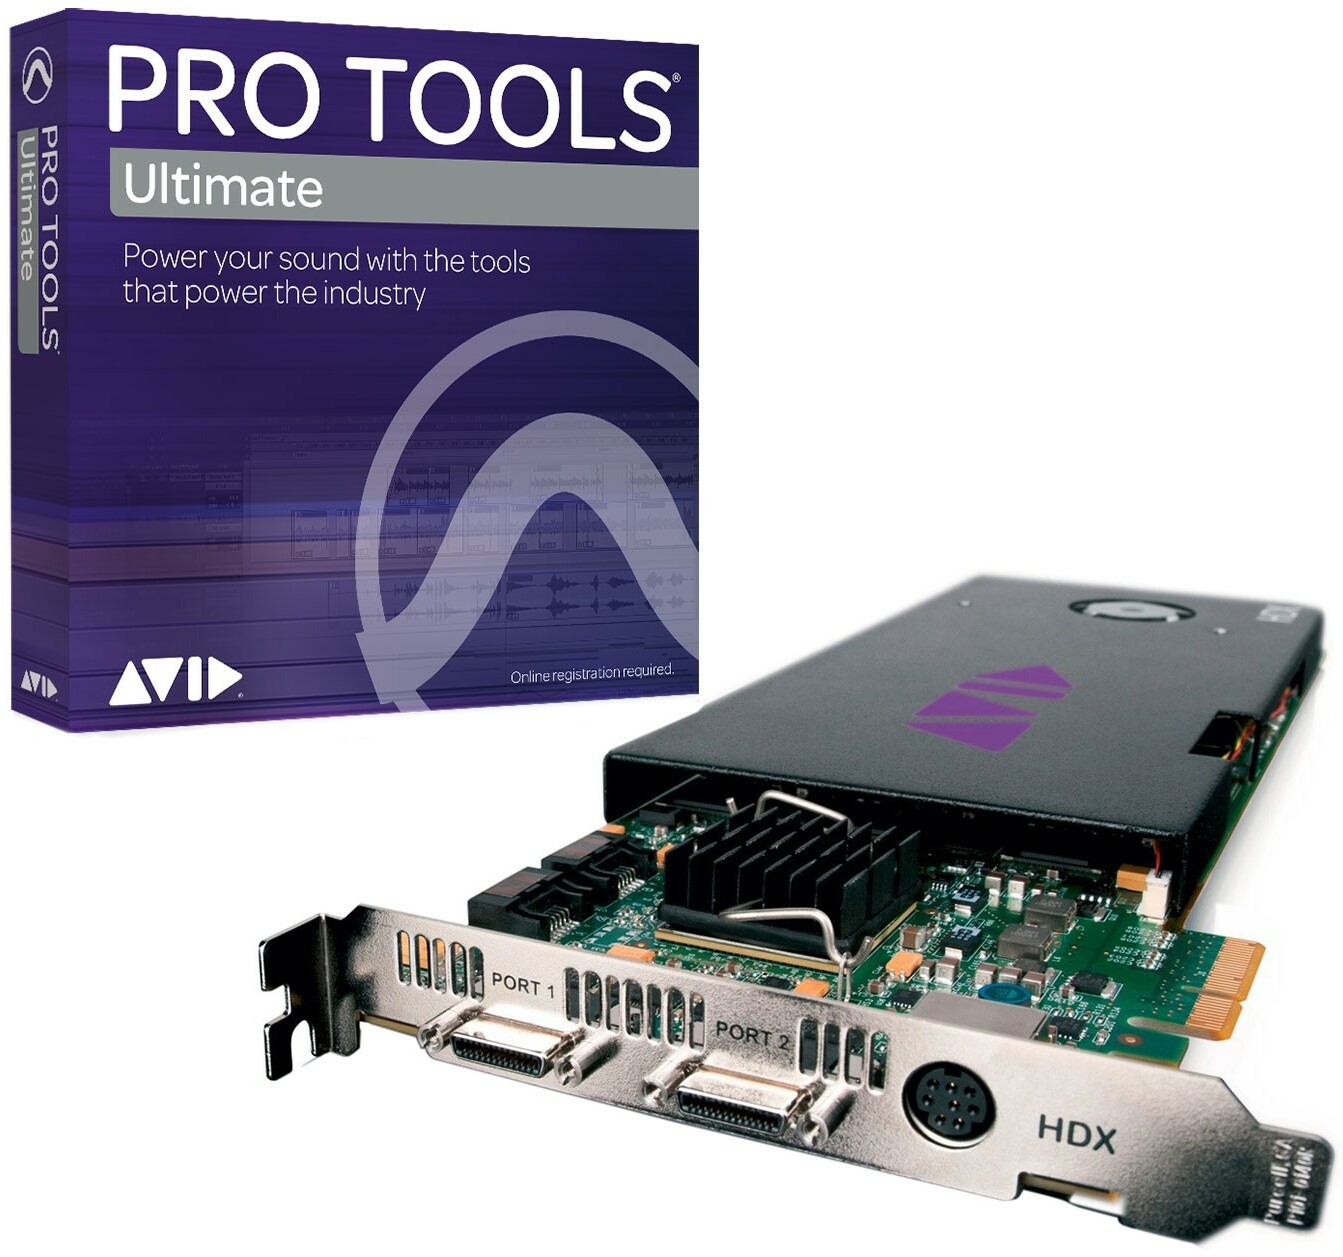 Avid Avid Hdx Core With Pro Tools Ultimate - Protools hd system - Main picture